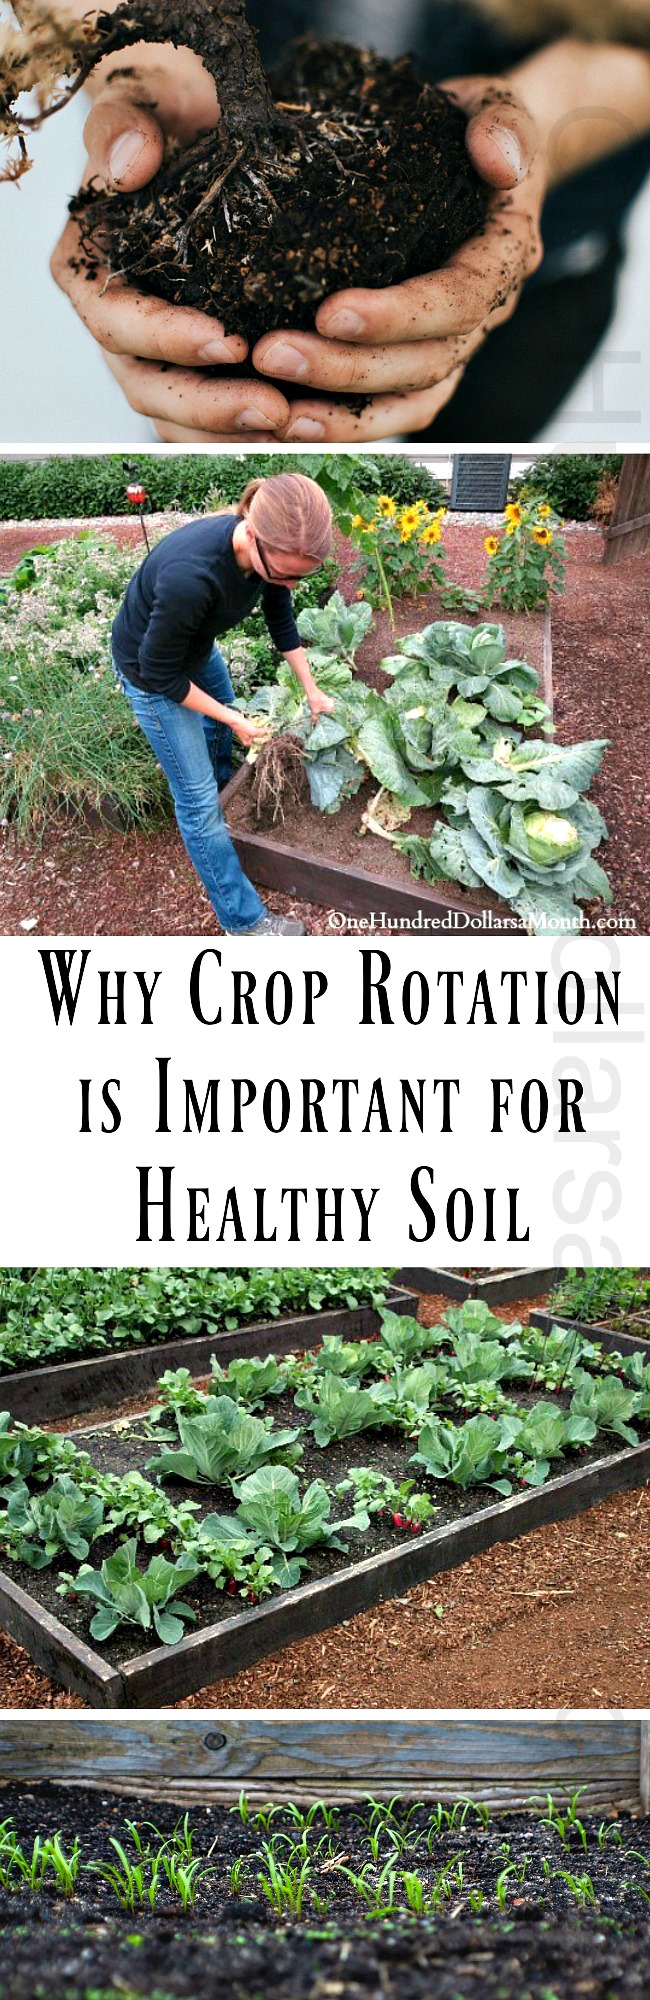 Why Crop Rotation is Important for Healthy Soil